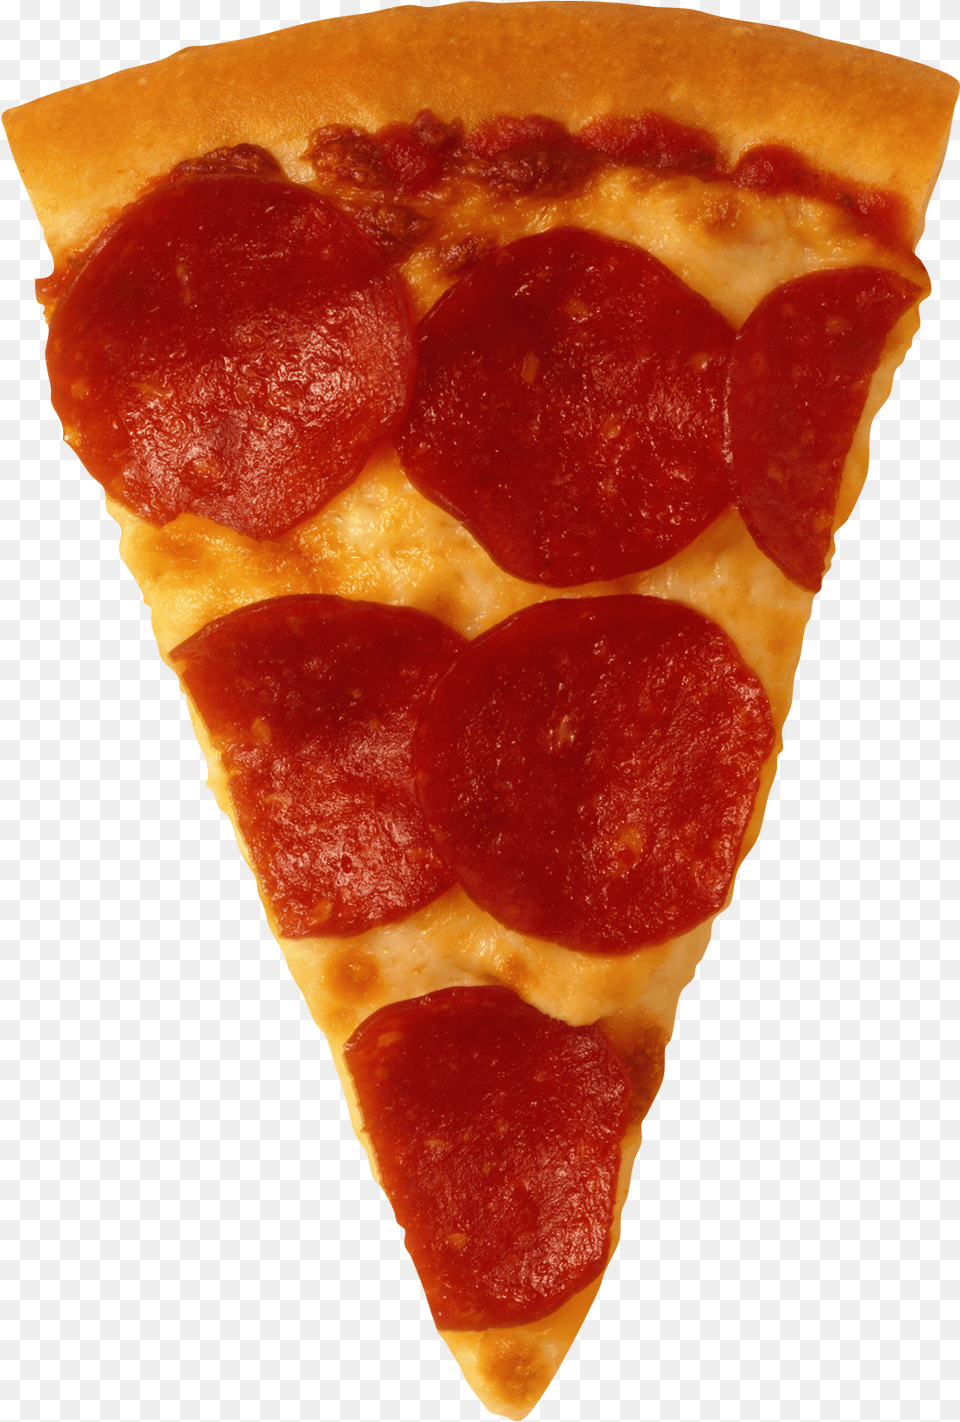 Pizza Delivery Pepperoni Hut 1 Pizza Slice Calories, Food, Ketchup Png